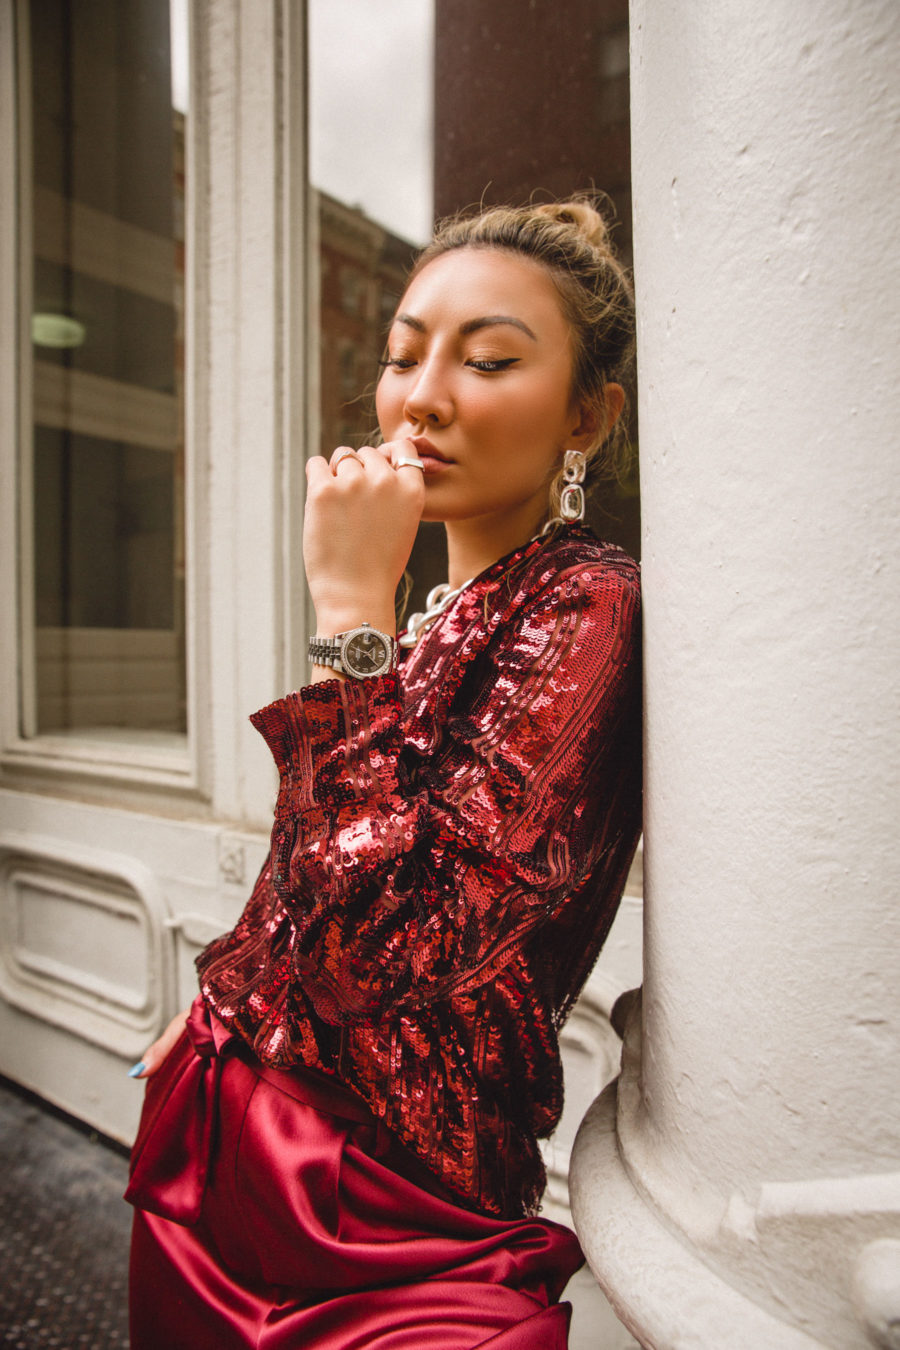 fashion blogger jessica wang shares holiday outfit ideas wearing sally lapointe sequin blouse and red satin pants // Notjessfashion.com